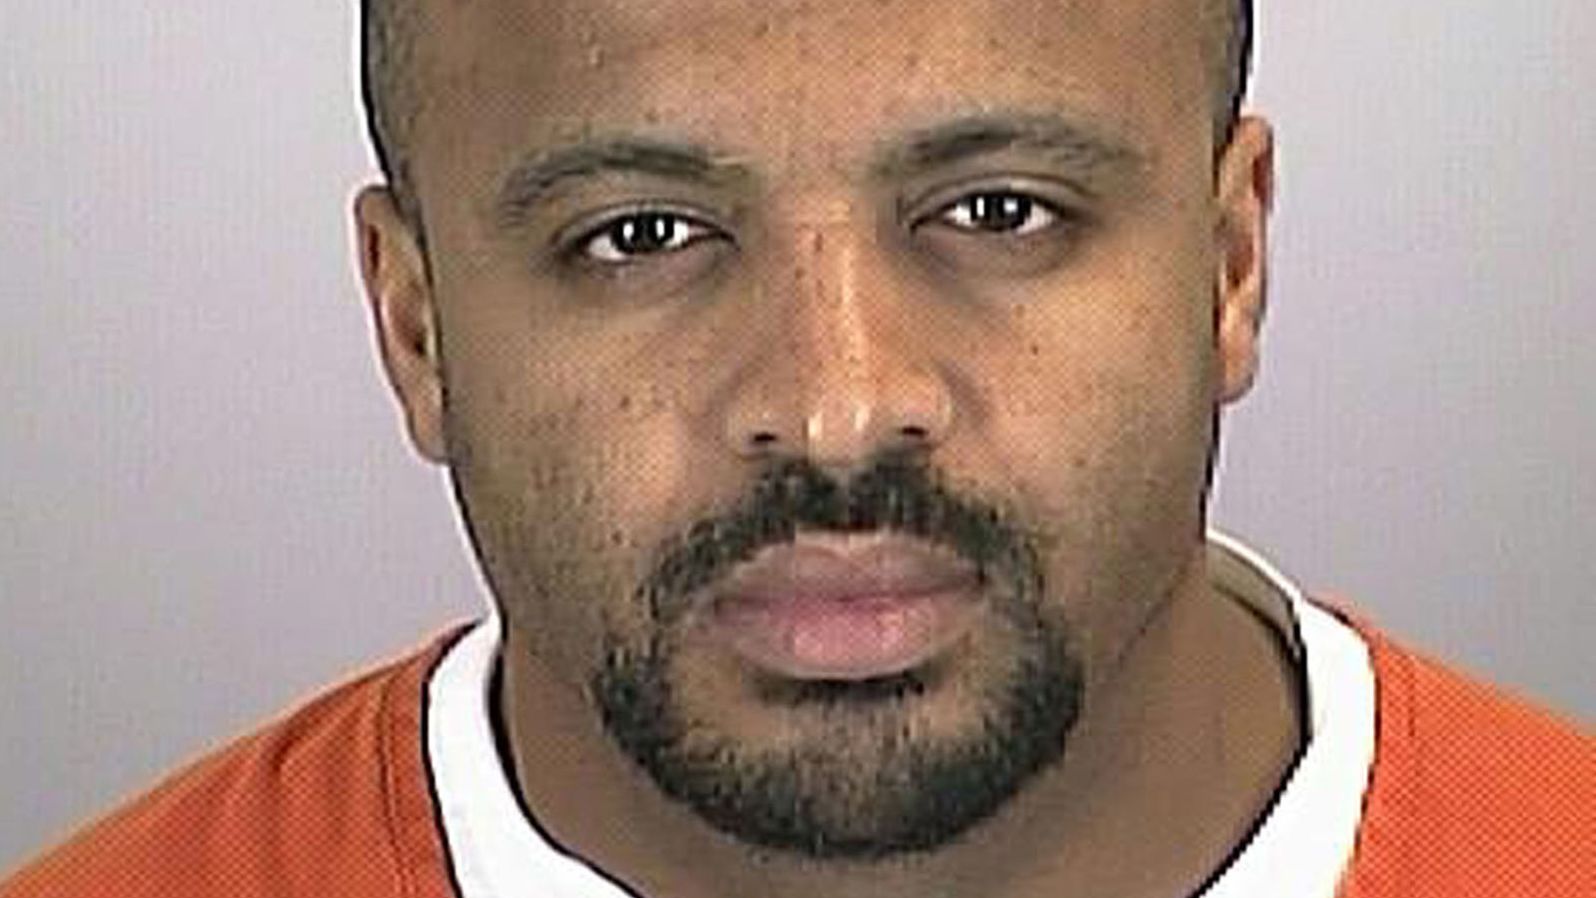 <a href="https://www.cnn.com/2014/11/17/world/zacarias-moussaoui-saudi-arabia/" target="_blank">Zacarias Moussaoui</a> is serving a life sentence after pleading guilty to terrorism and murder conspiracy in connection with the September 11 hijackings. 